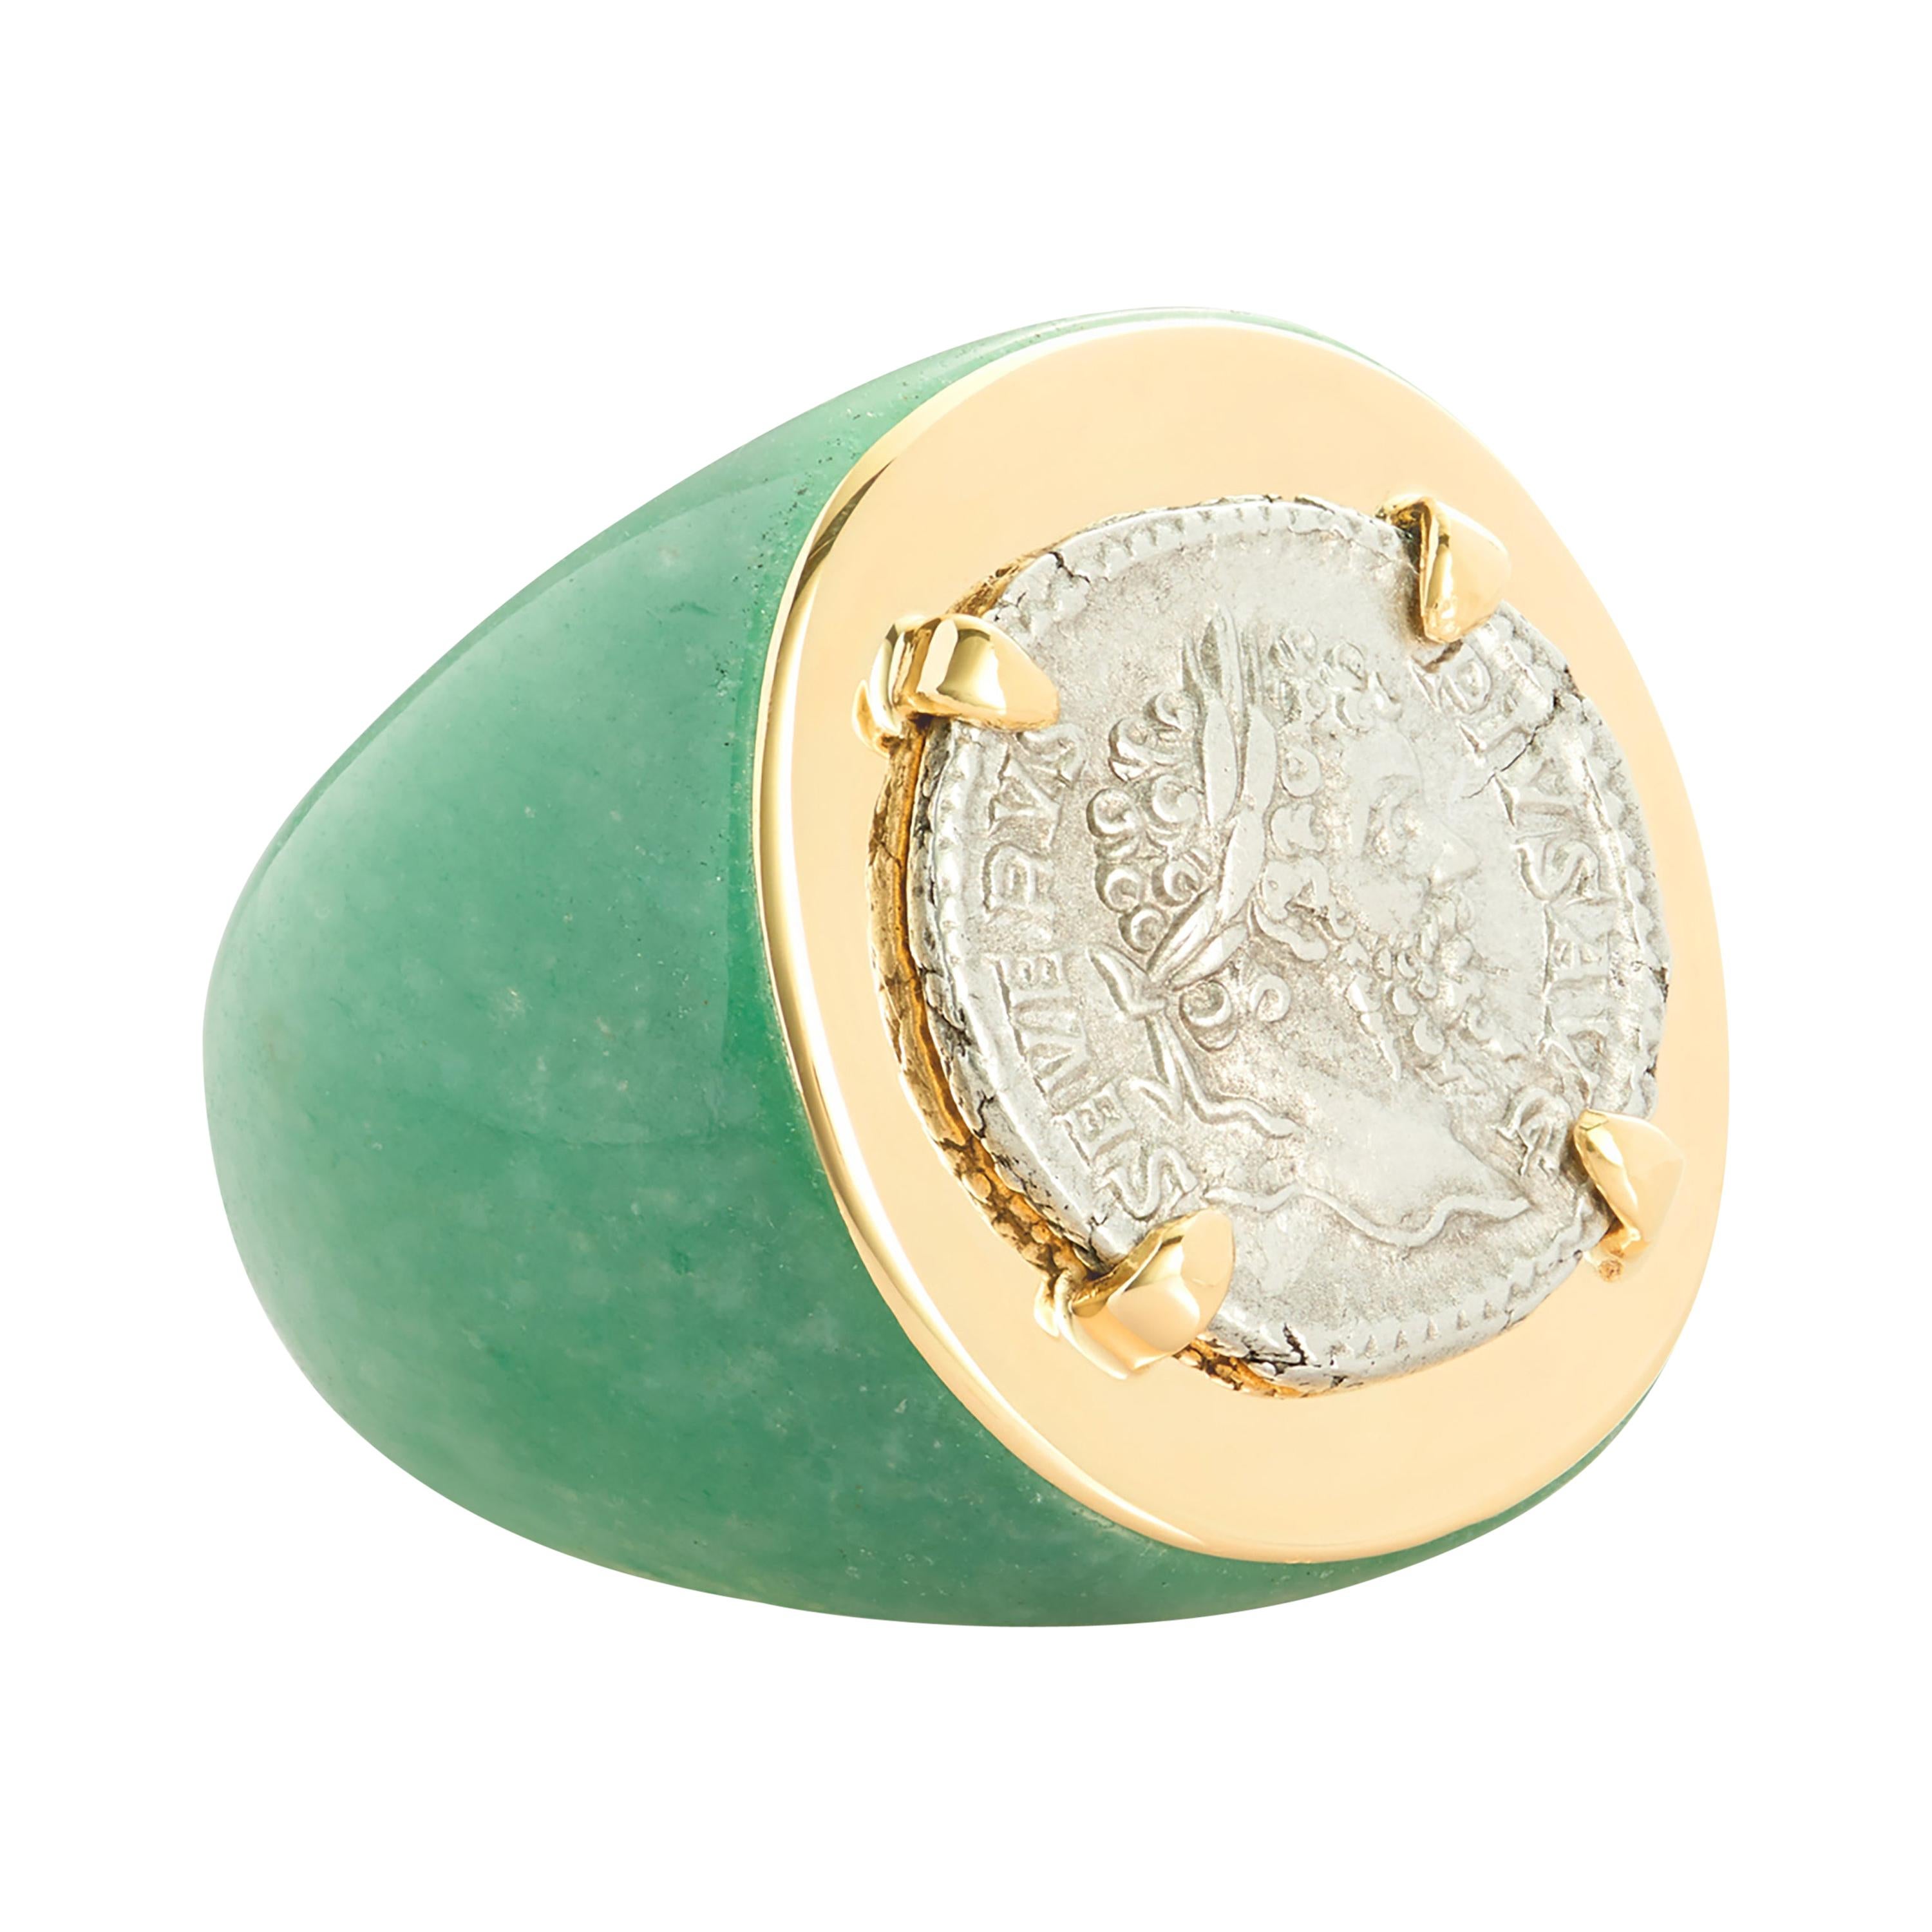 Dubini Ancient Roman Imperial Silver Coin 18 Karat Gold Aventurine Ring For Sale